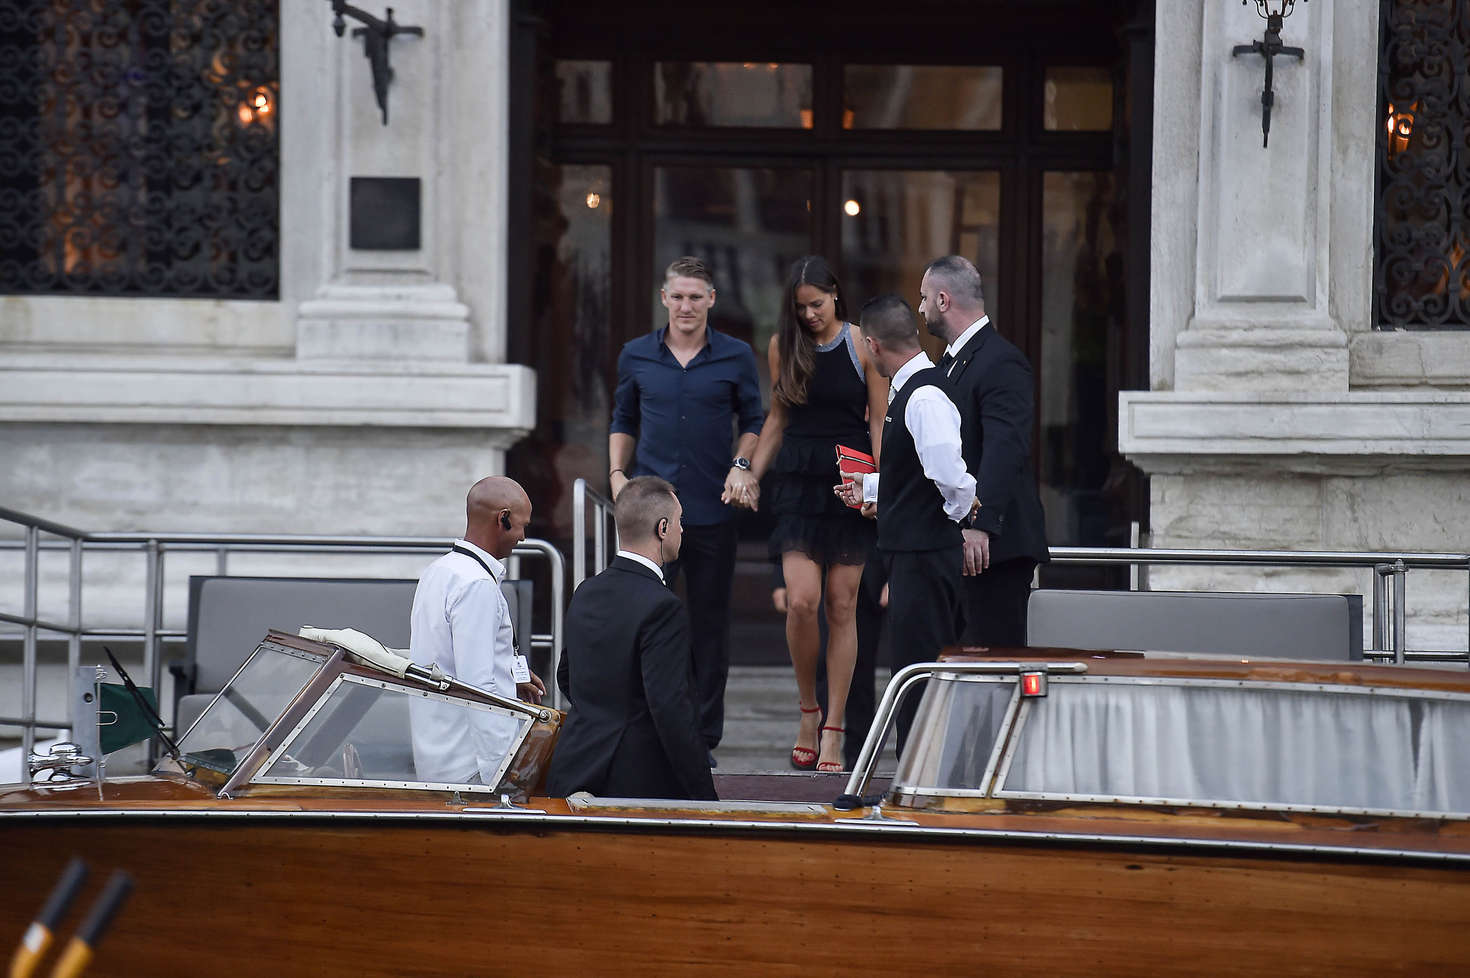 Ana Ivanovic and Bastian Schweinsteiger Out for Dinner in Venice